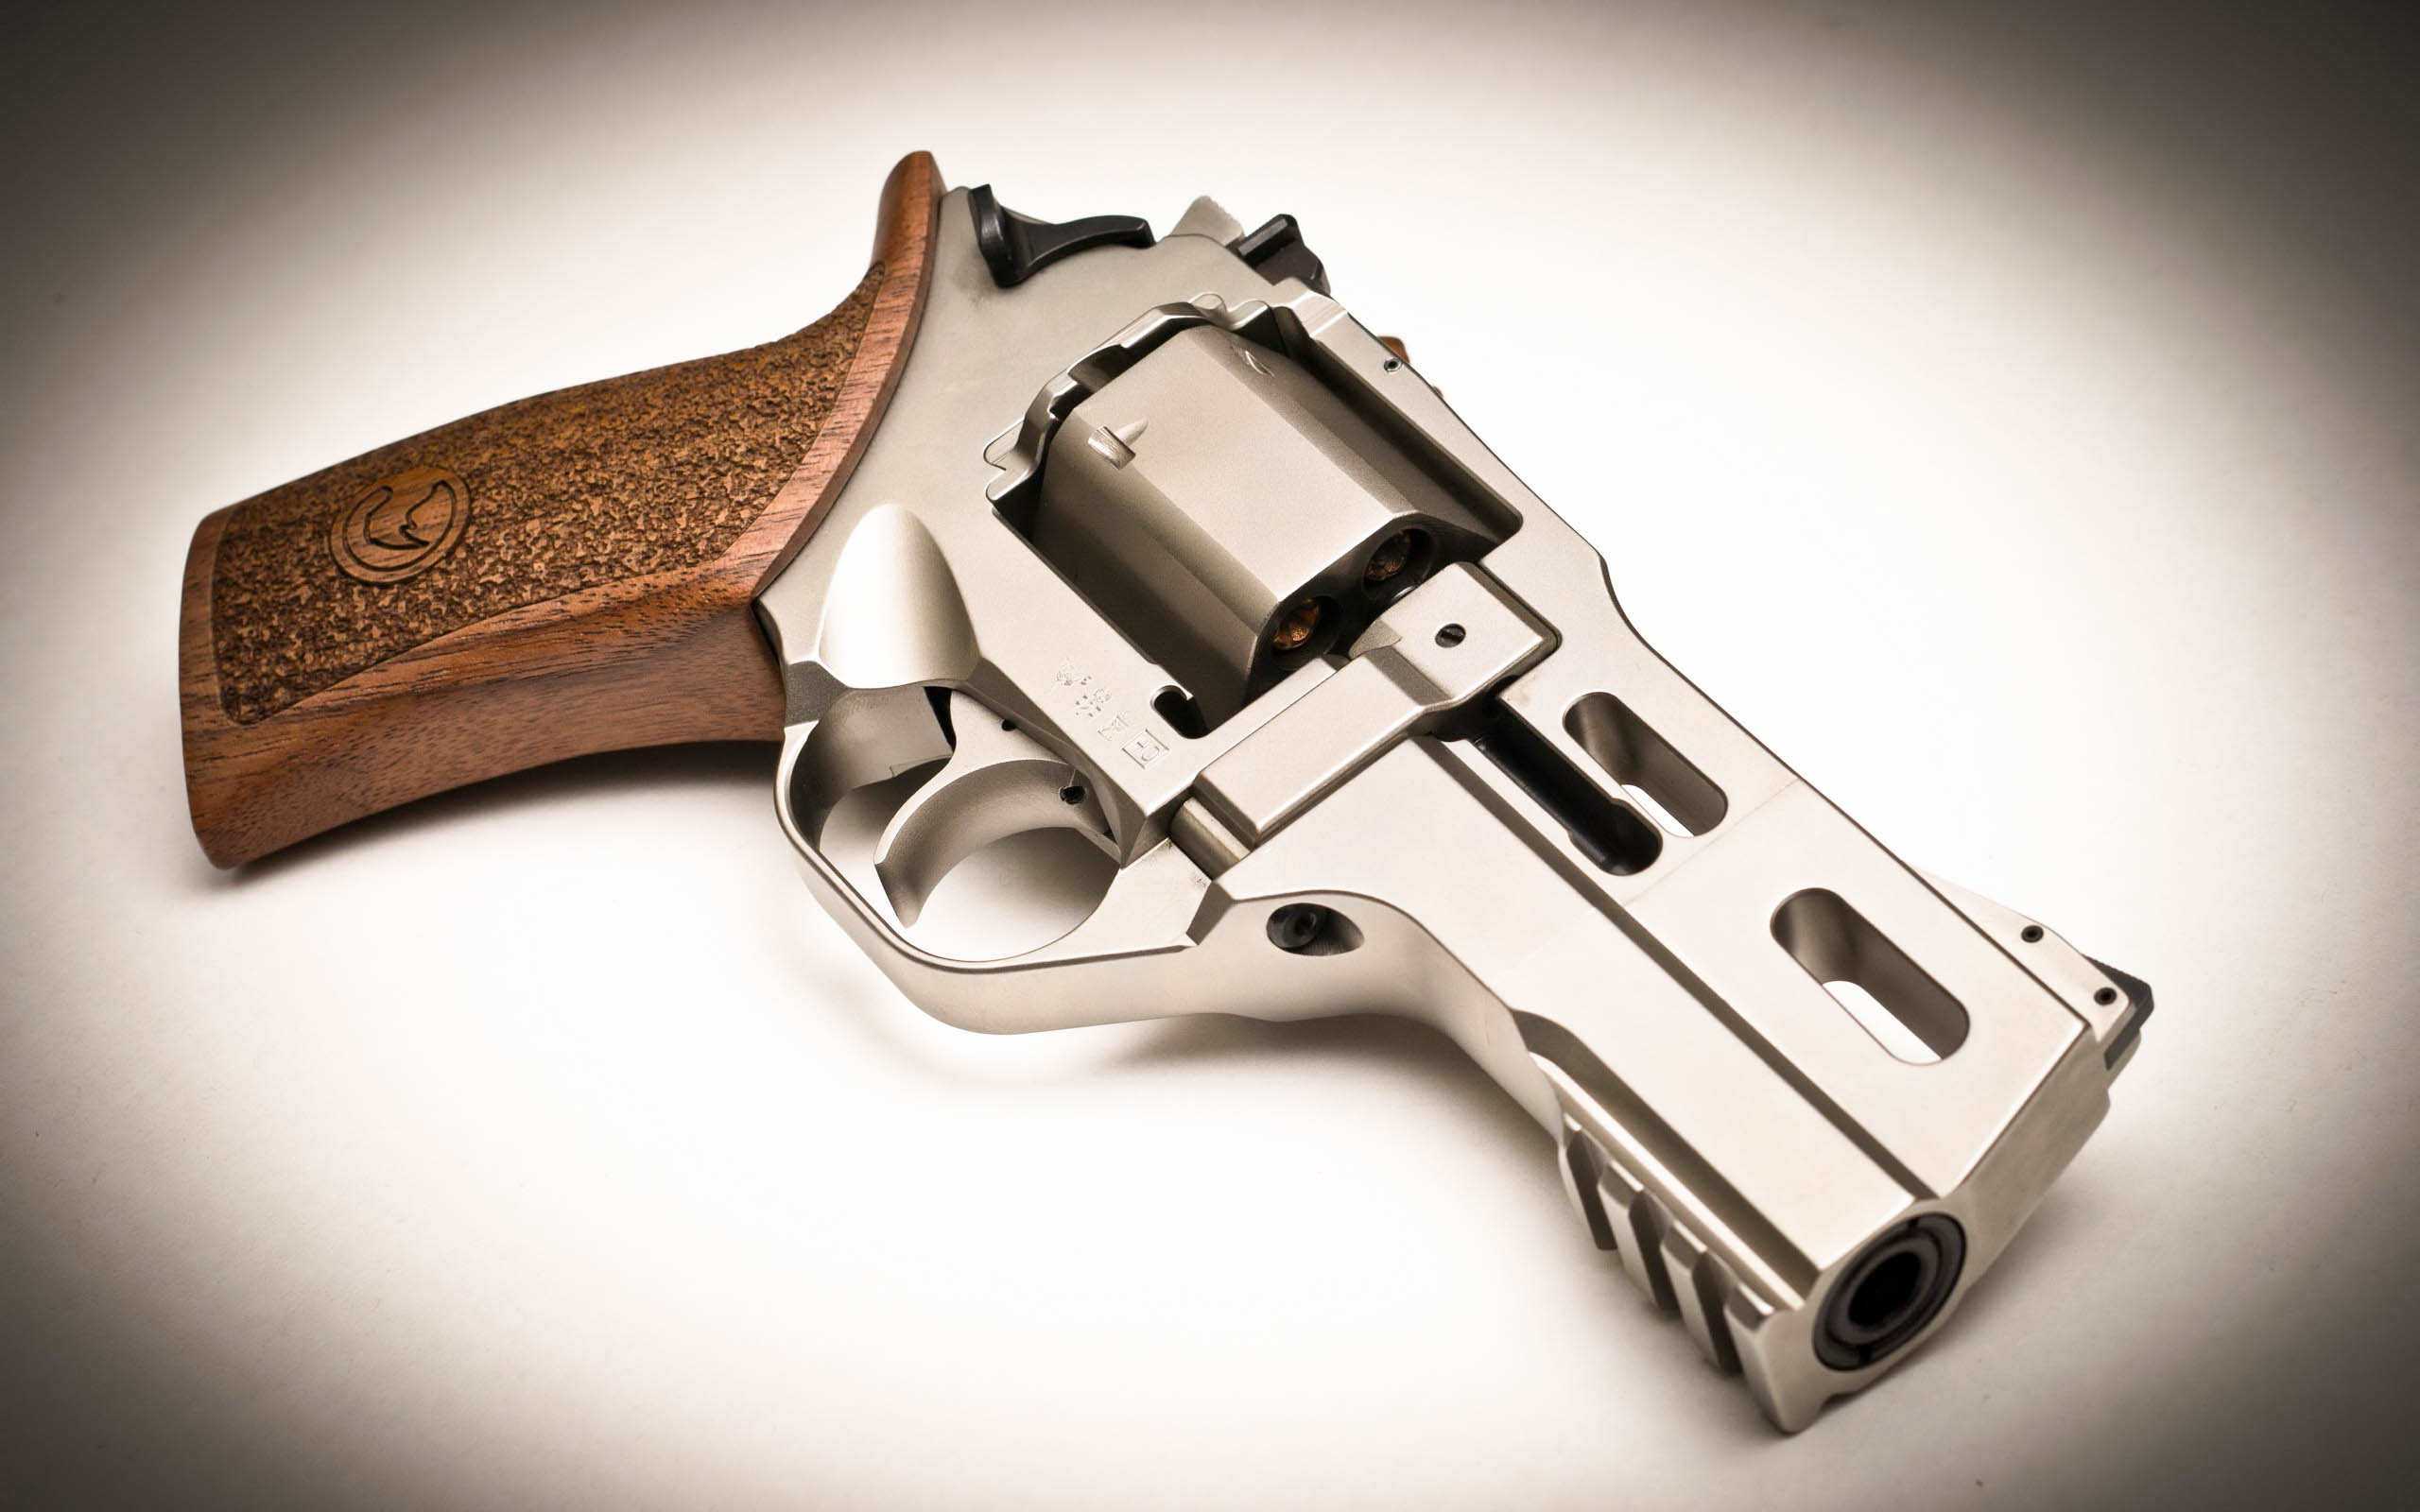 Chiappa Rhino Revolver Backgrounds on Wallpapers Vista